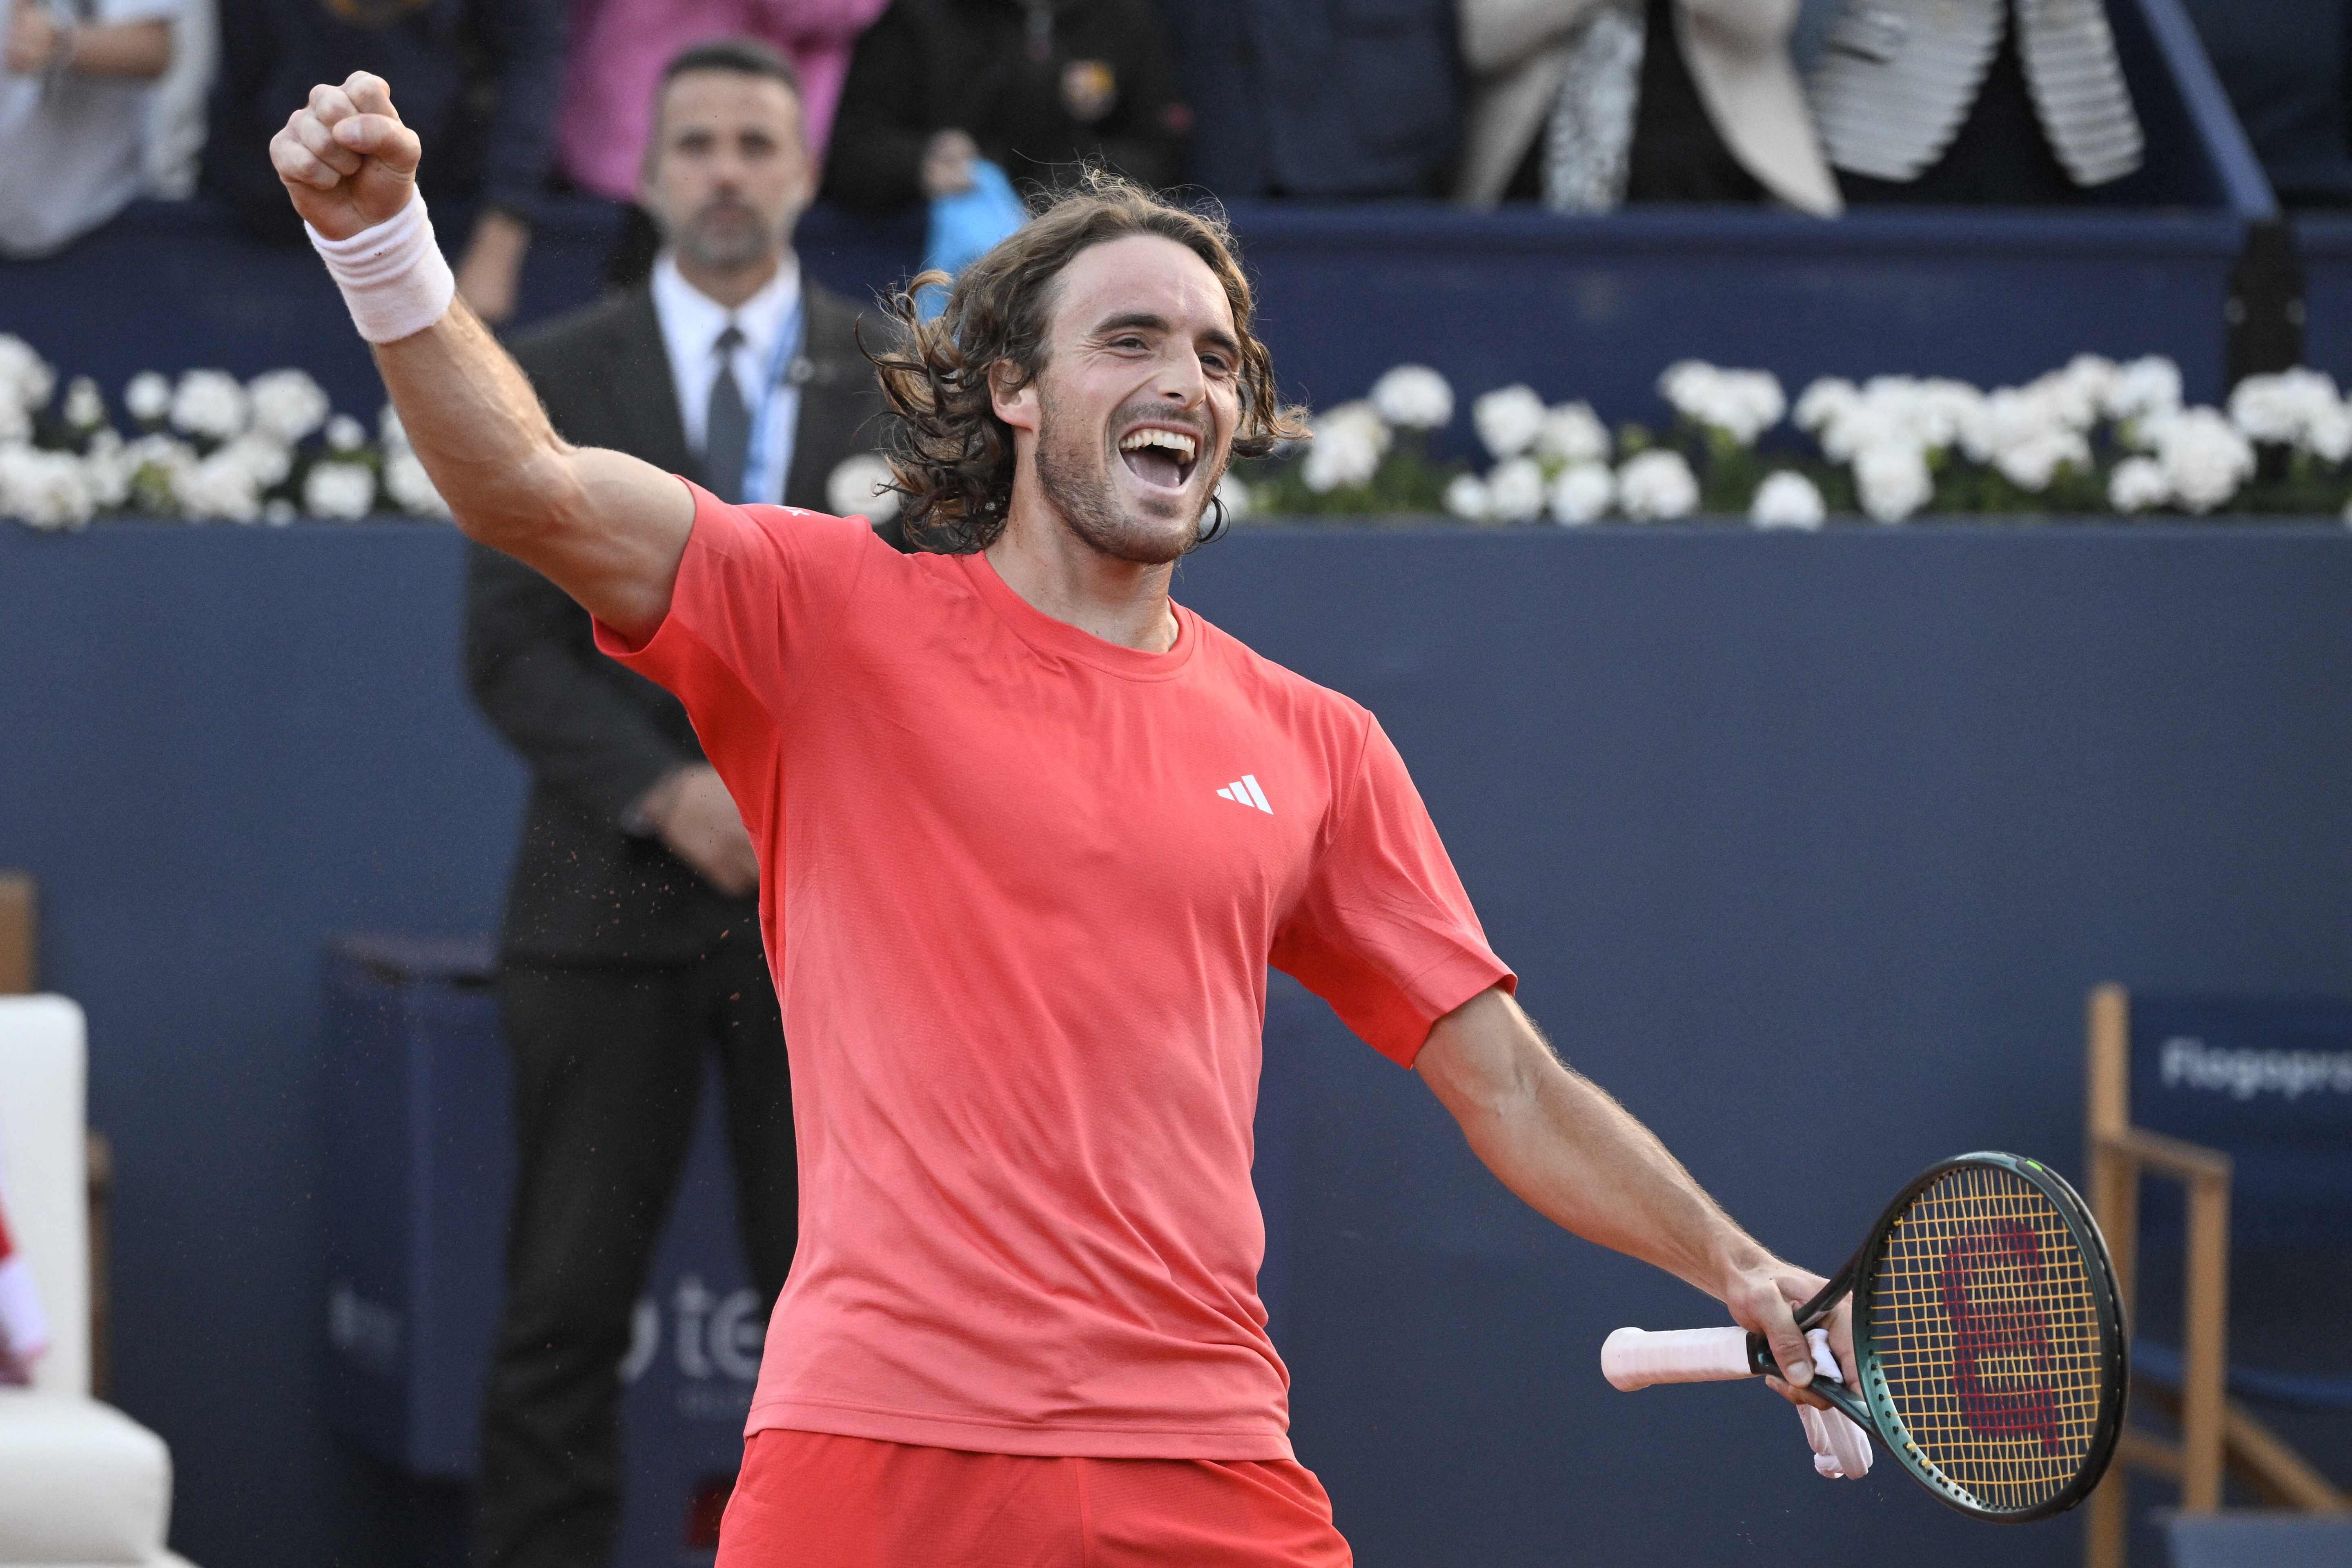 Stefanos Tsitsipas saves two match points to reach Barcelona semi-finals